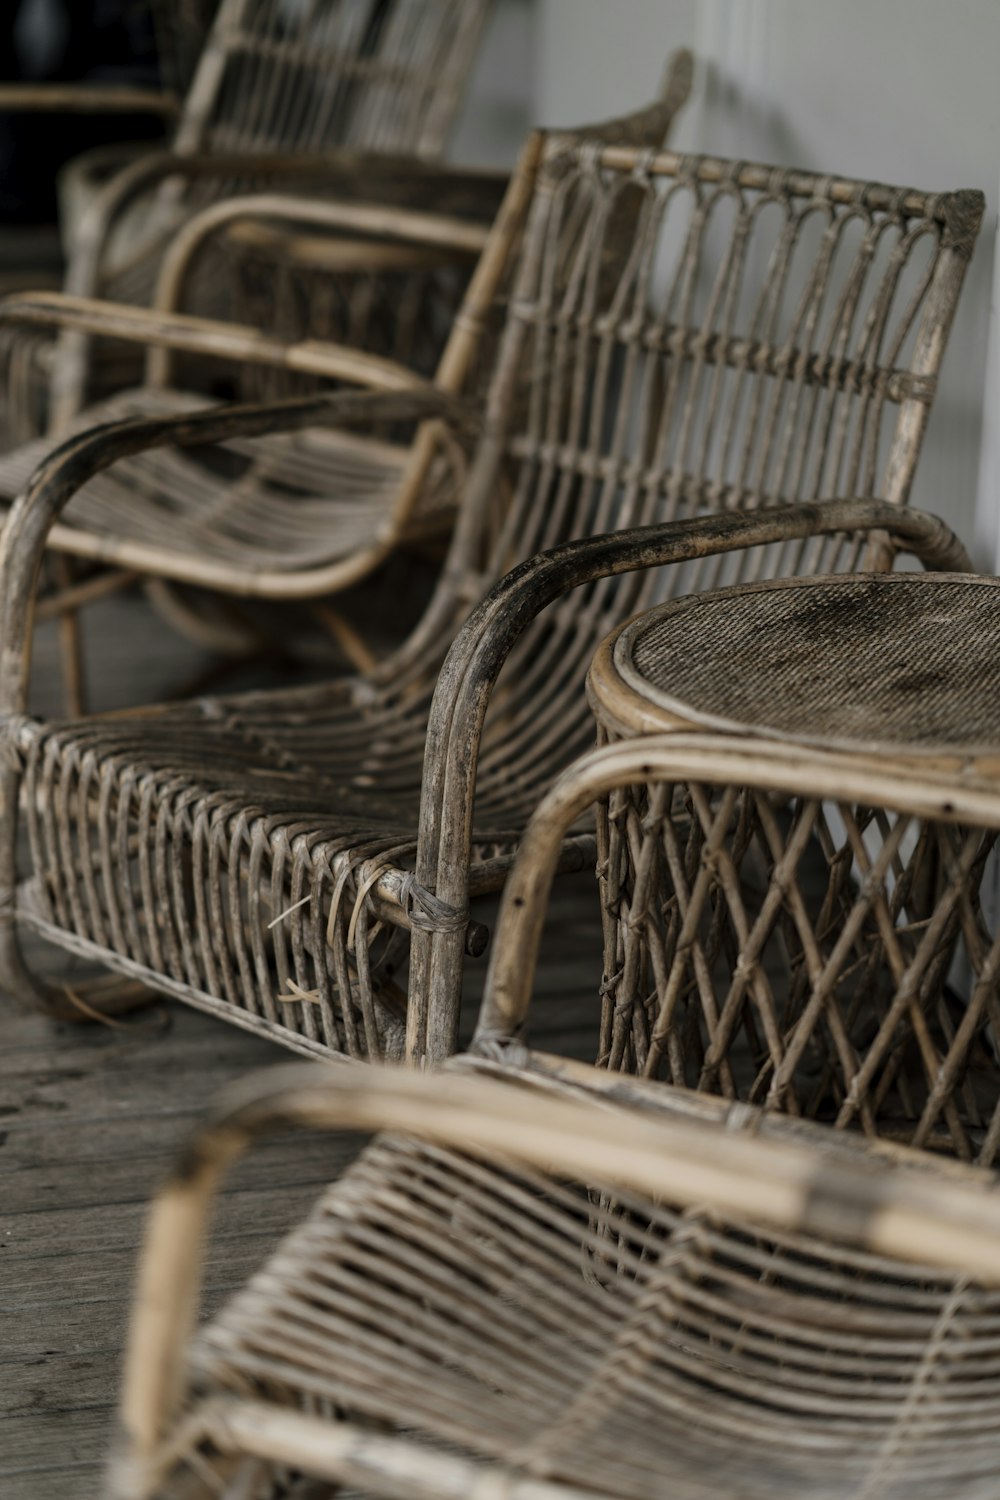 a row of wicker chairs sitting on top of a wooden floor